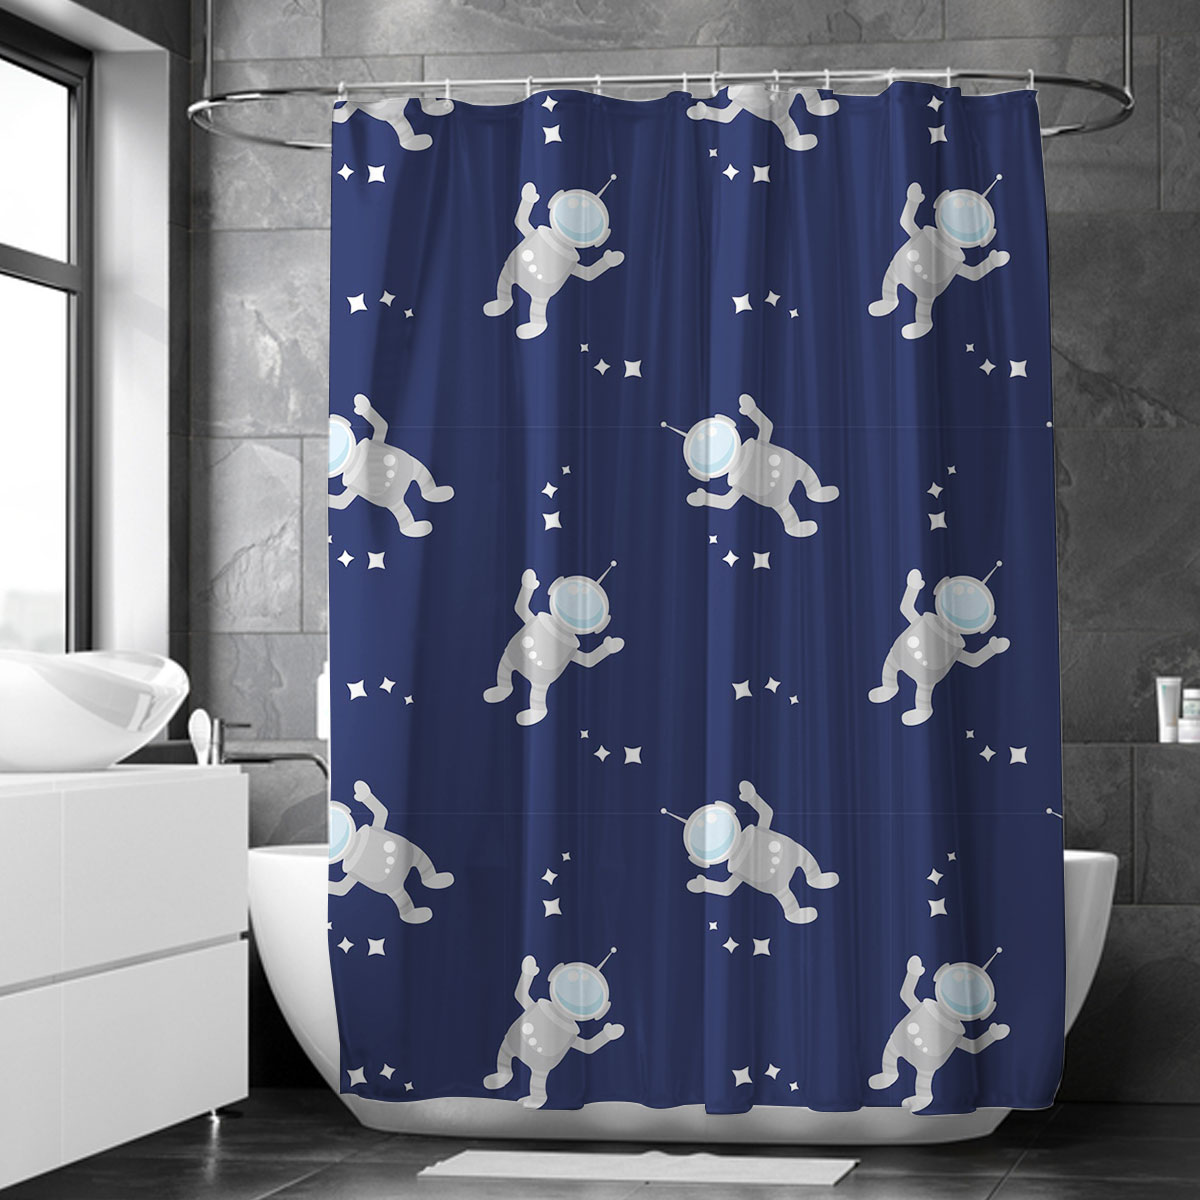 Astronauts Characters Shower Curtain